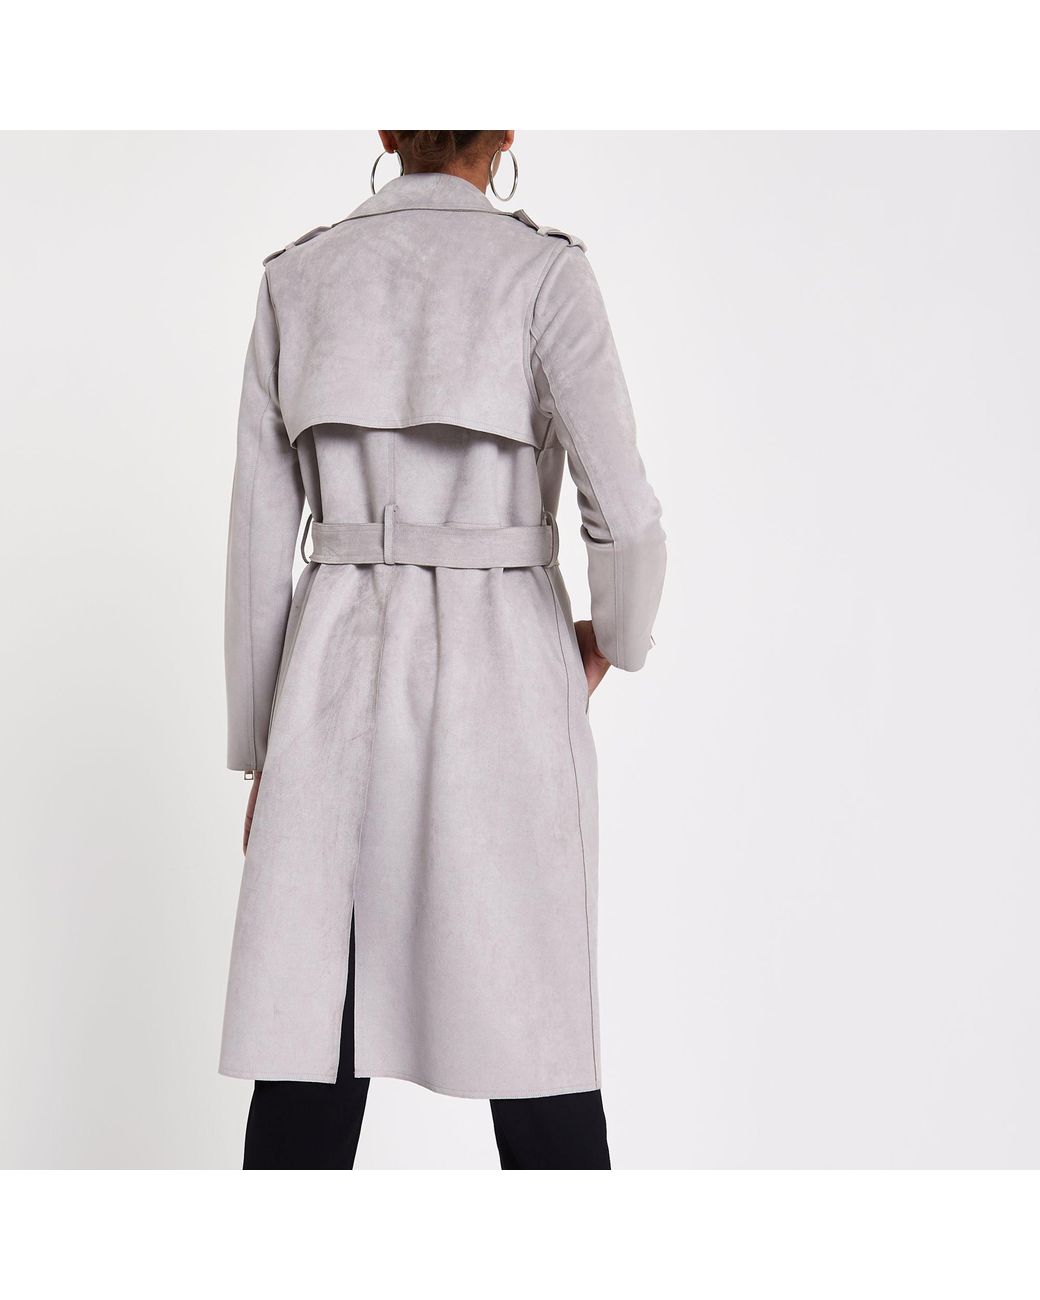 River Island Light Grey Faux Suede Longline Trench Jacket in Gray | Lyst